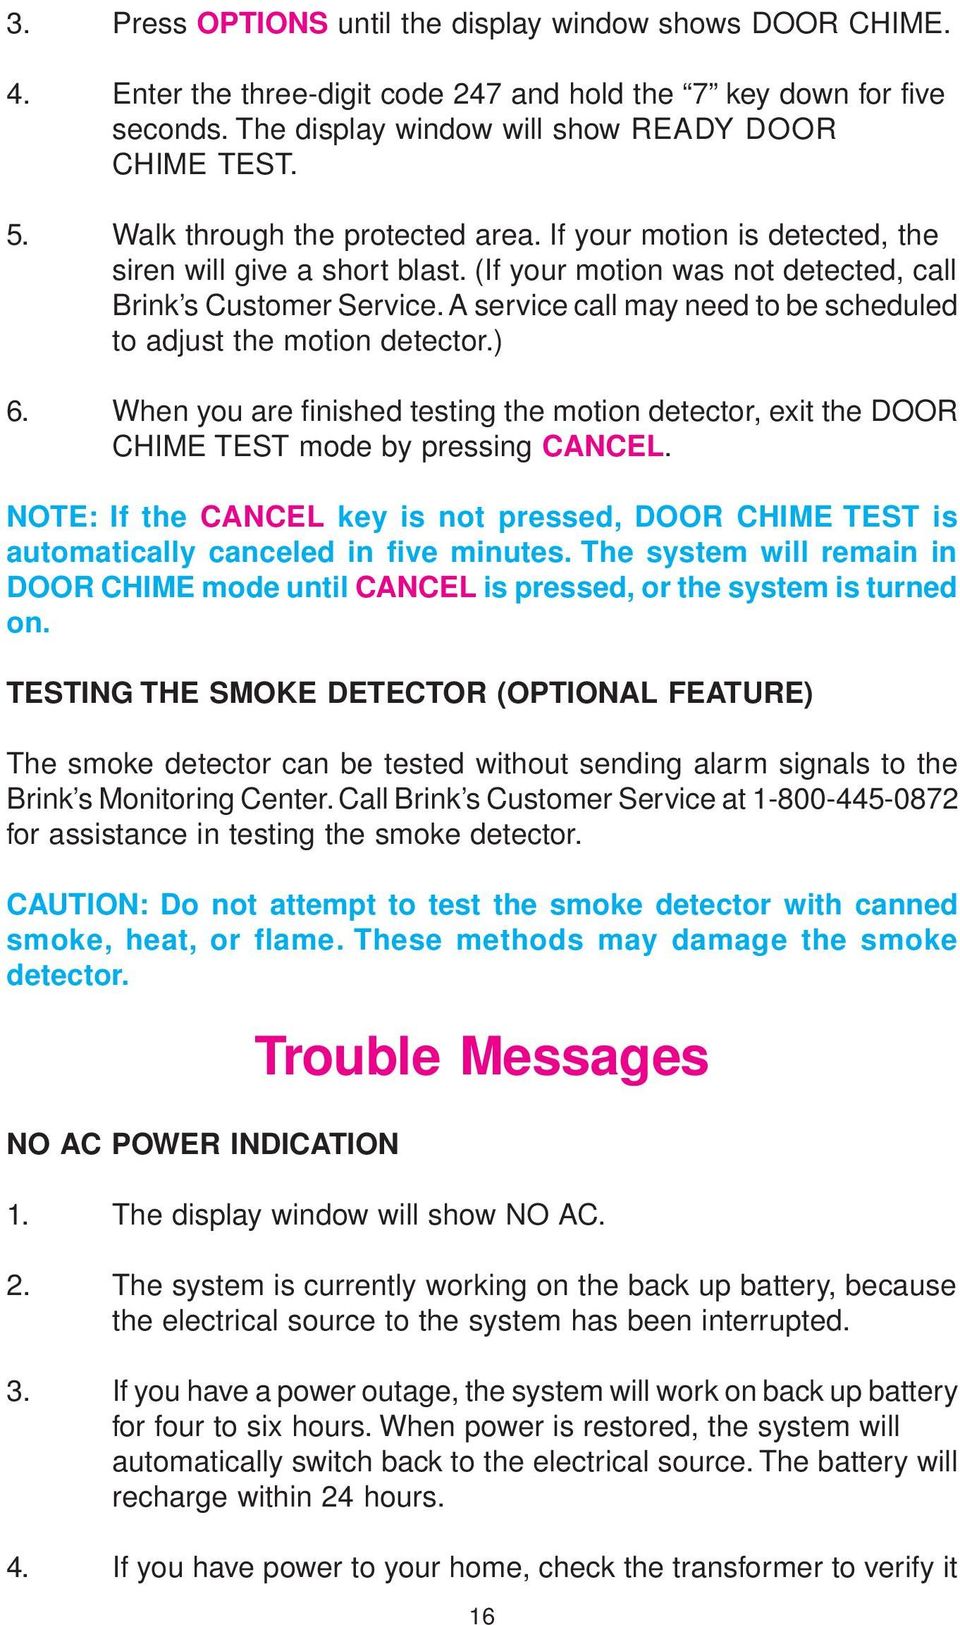 A service call may need to be scheduled to adjust the motion detector.) 6. When you are finished testing the motion detector, exit the DOOR CHIME TEST mode by pressing CANCEL.